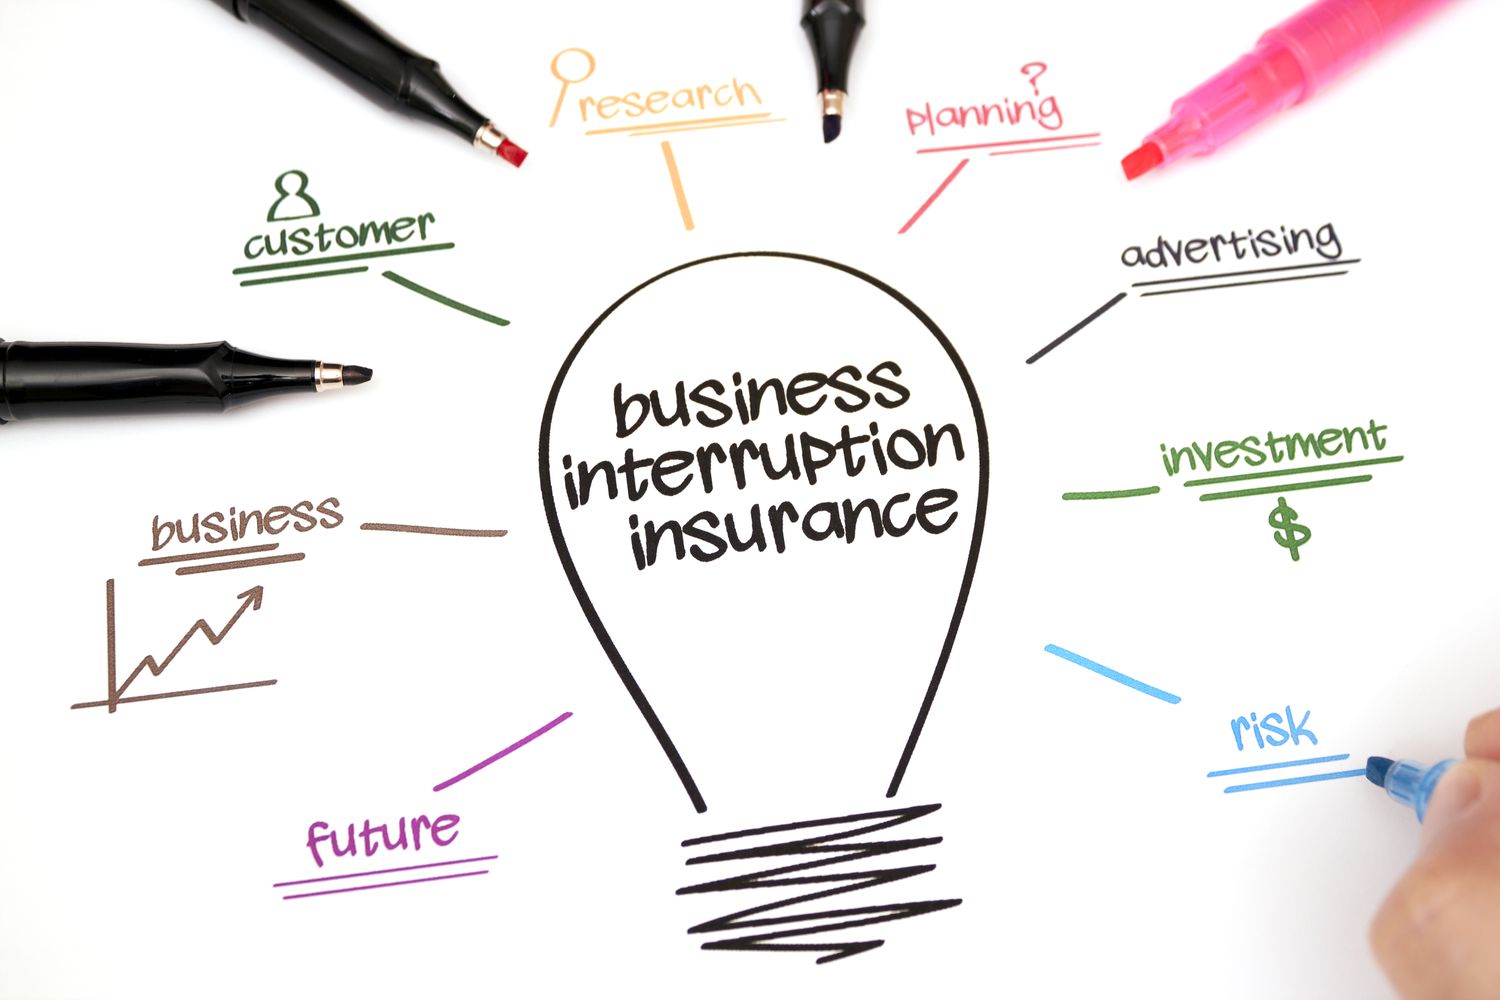 what is business interruption insurance?